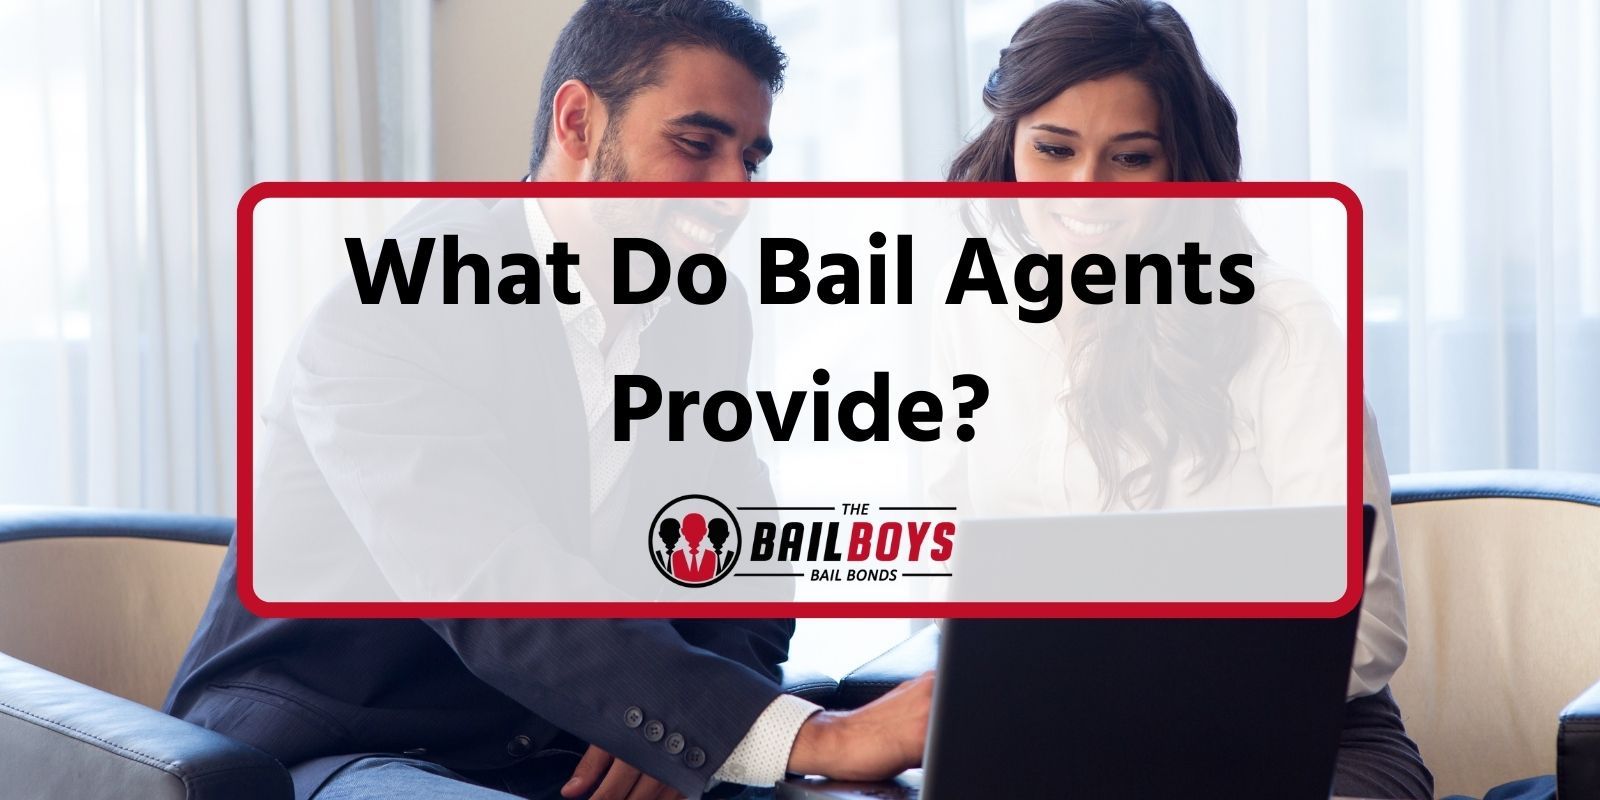 What Do Bail Agents Provide?